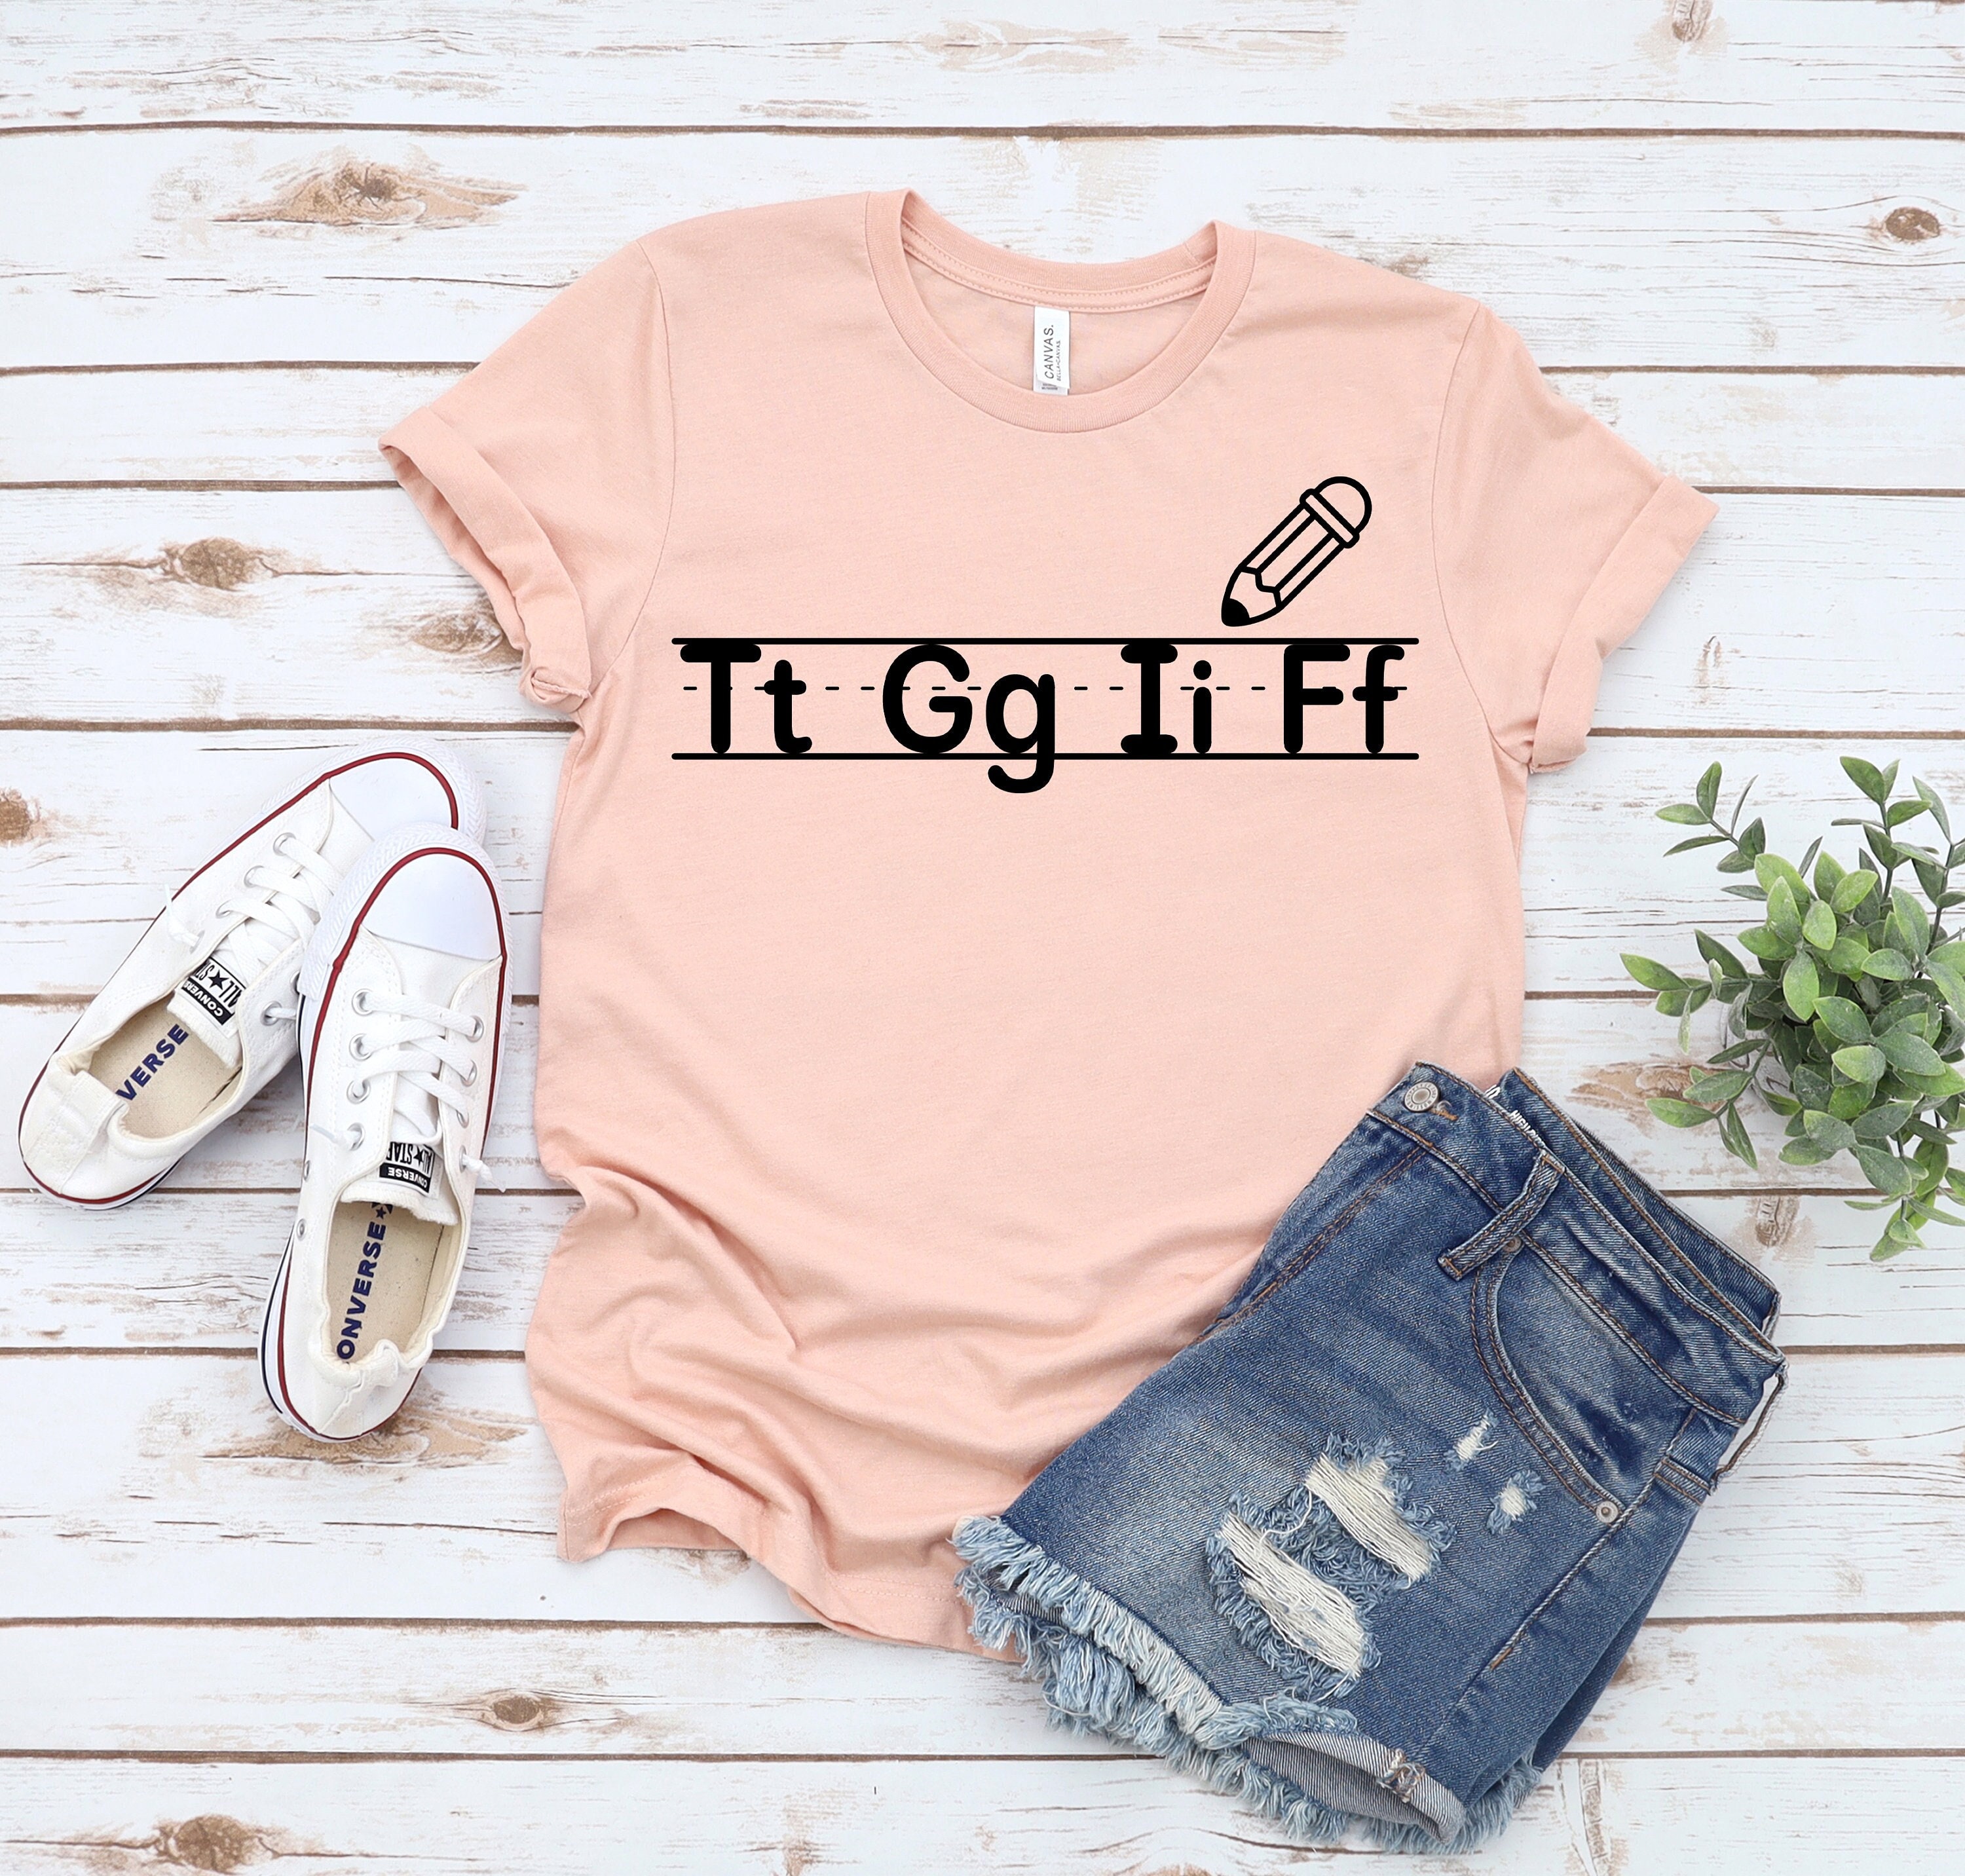 Tgif T-Shirt, Thank God It Is Friday Shirt, Back to School, Funny Teacher Gift, Learn to Letter T-Shirt, Gift for Teachers